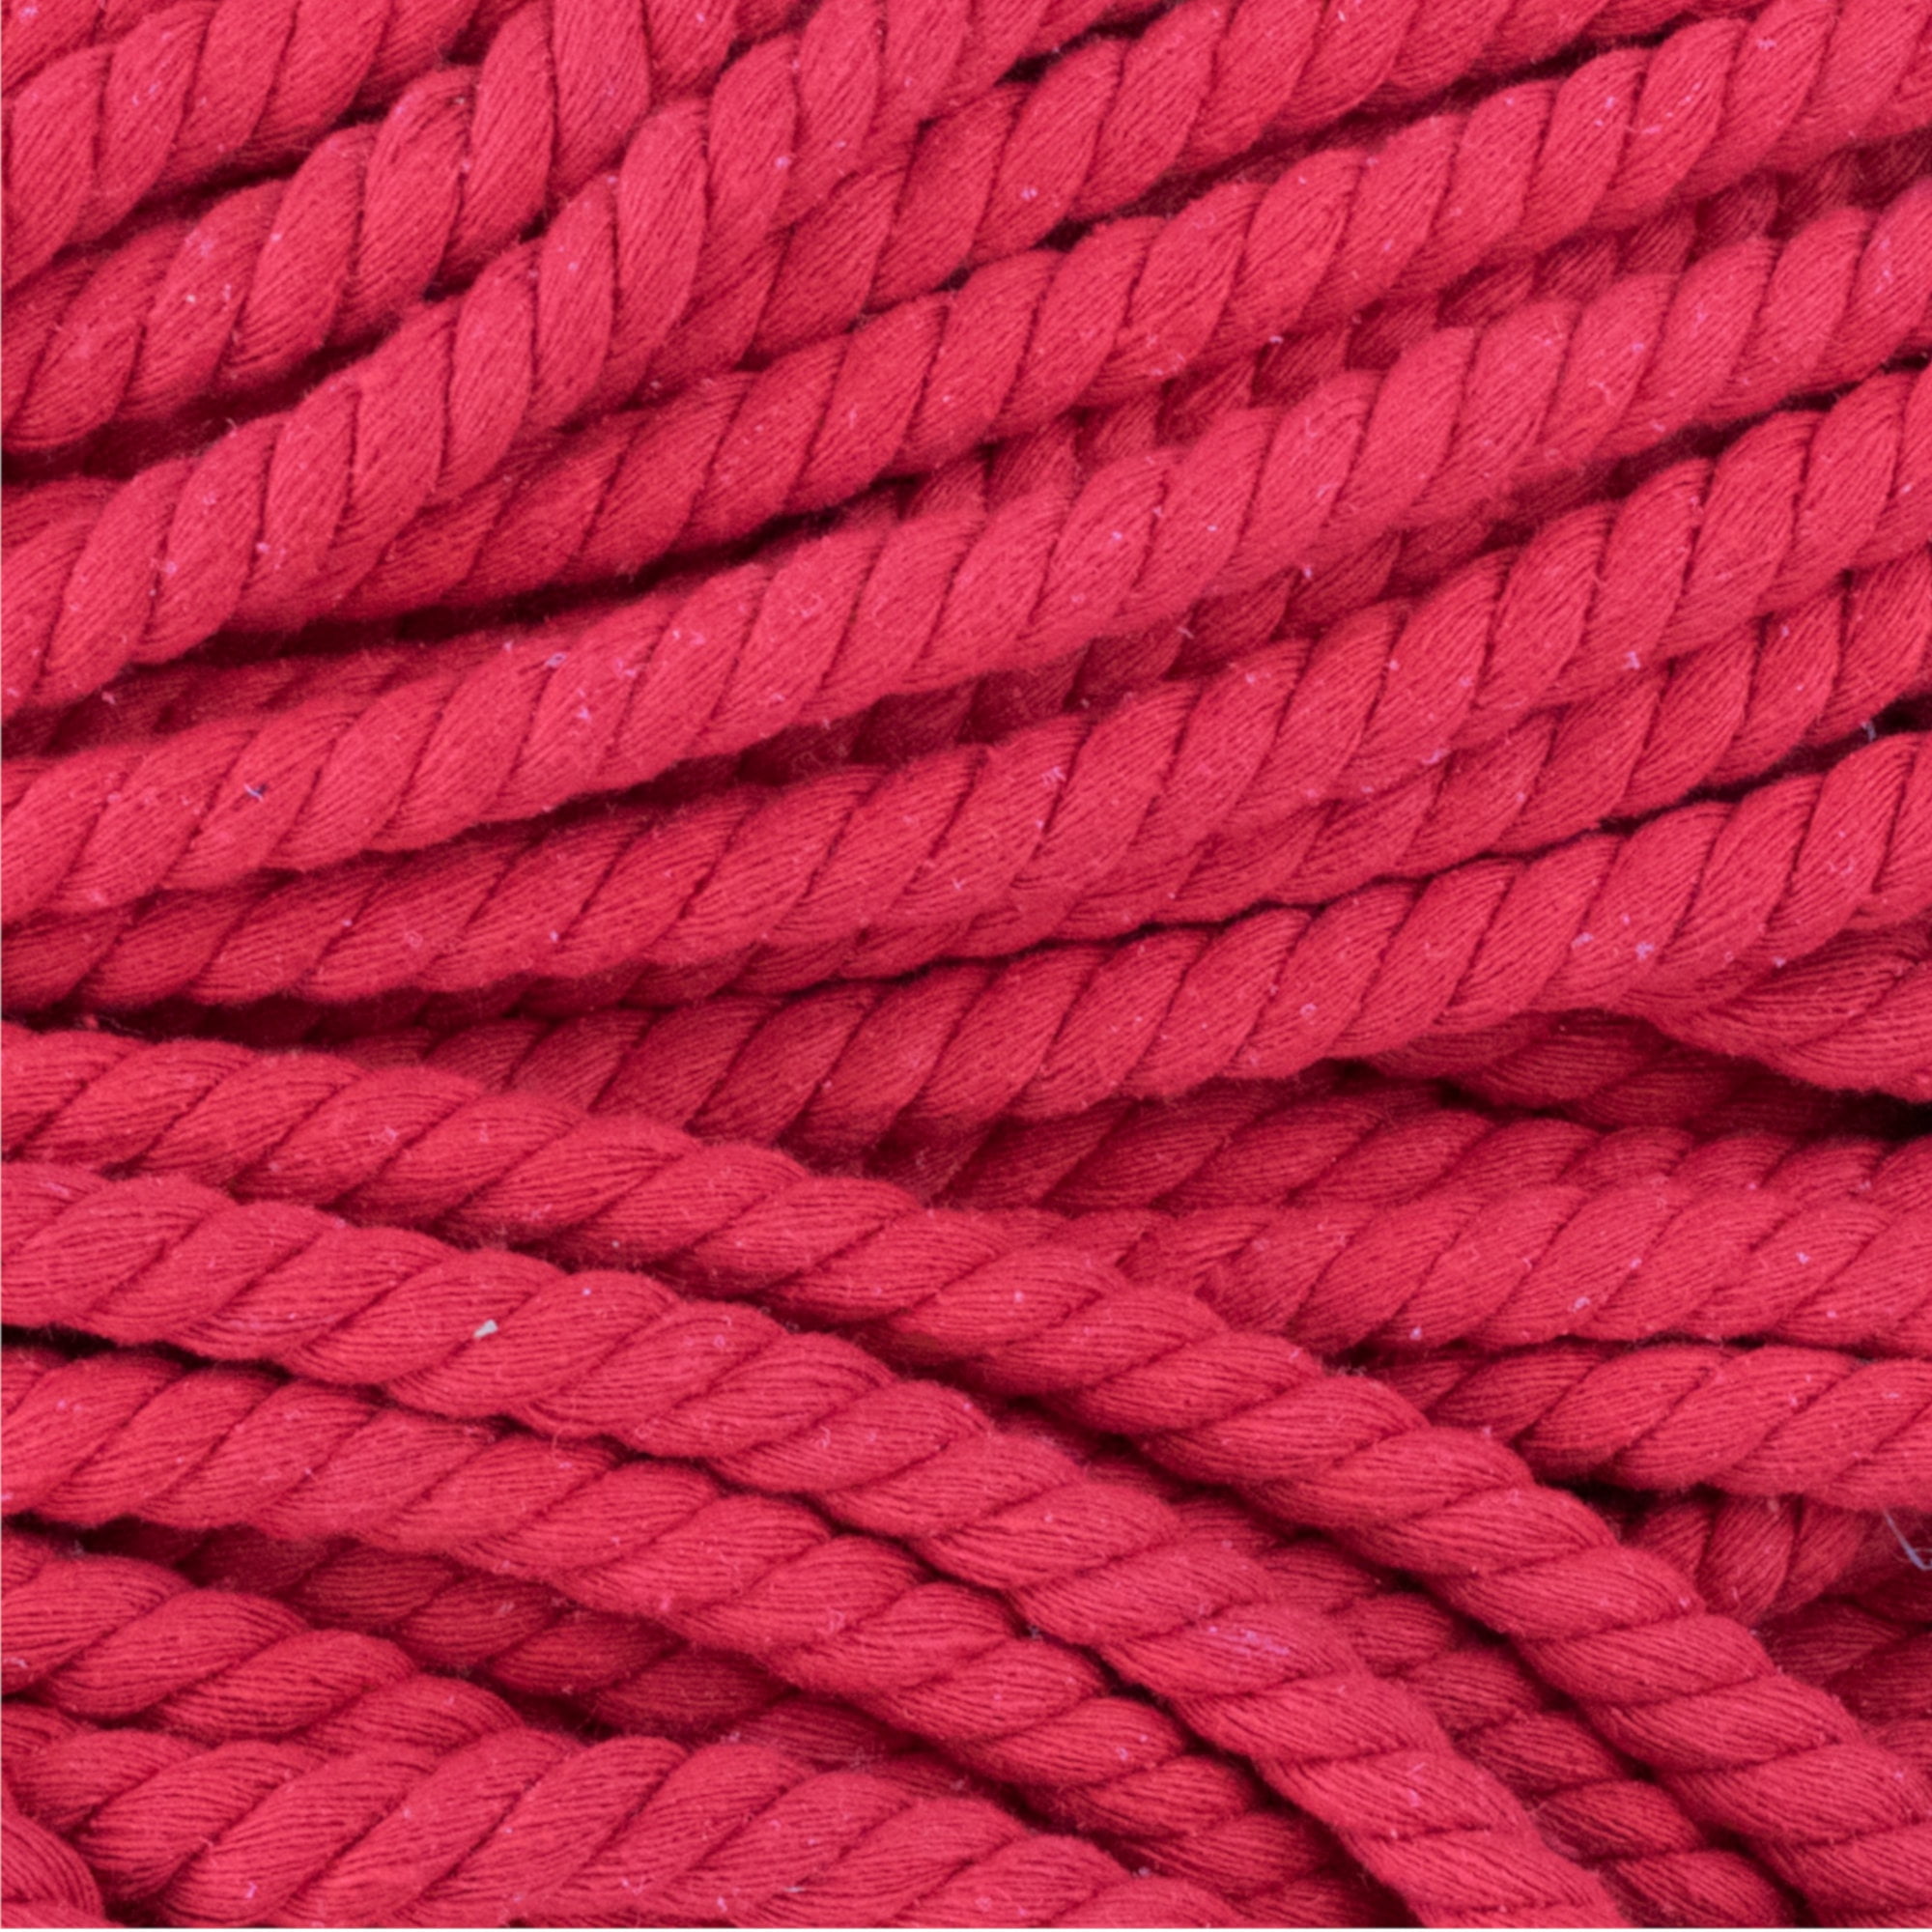 Crimson Red Twisted Cotton Rope Set